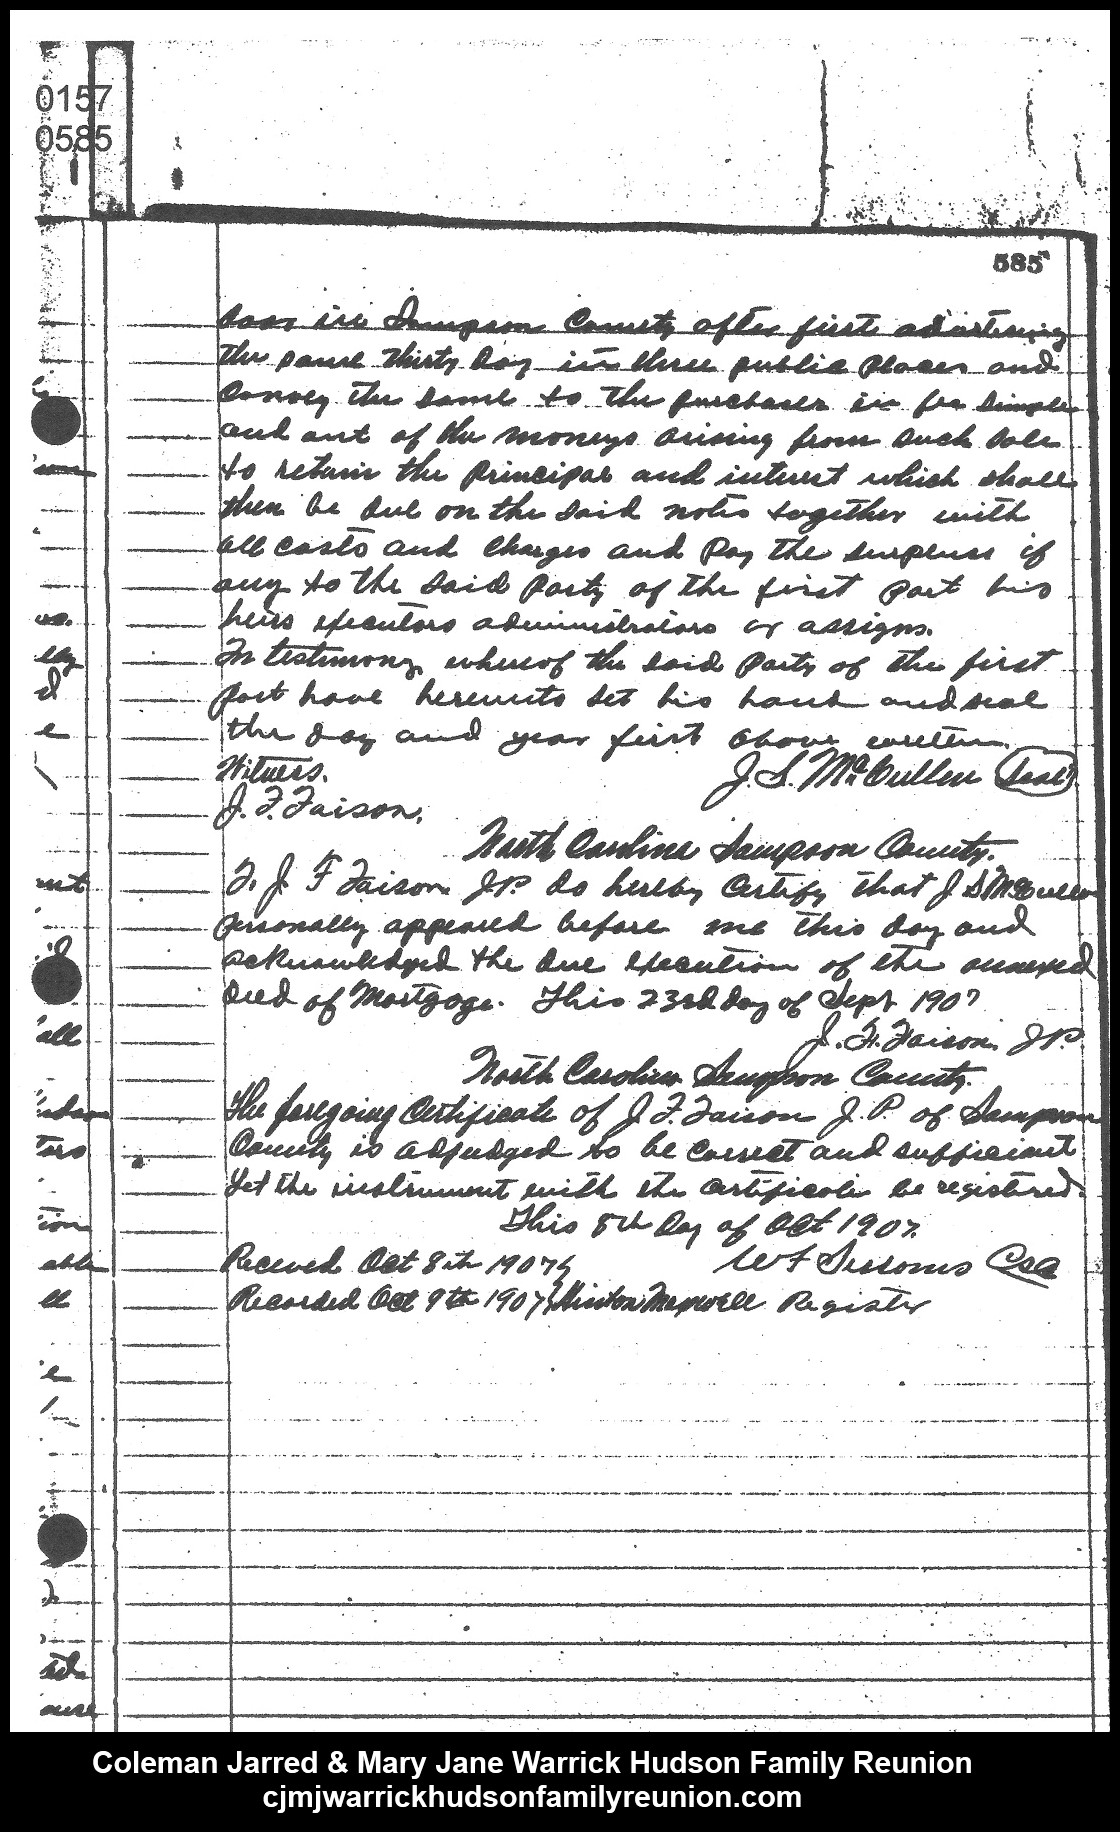 1907, 10-9 - Deed - J. S. McCullen to MJ & George ([page 3 of 3)